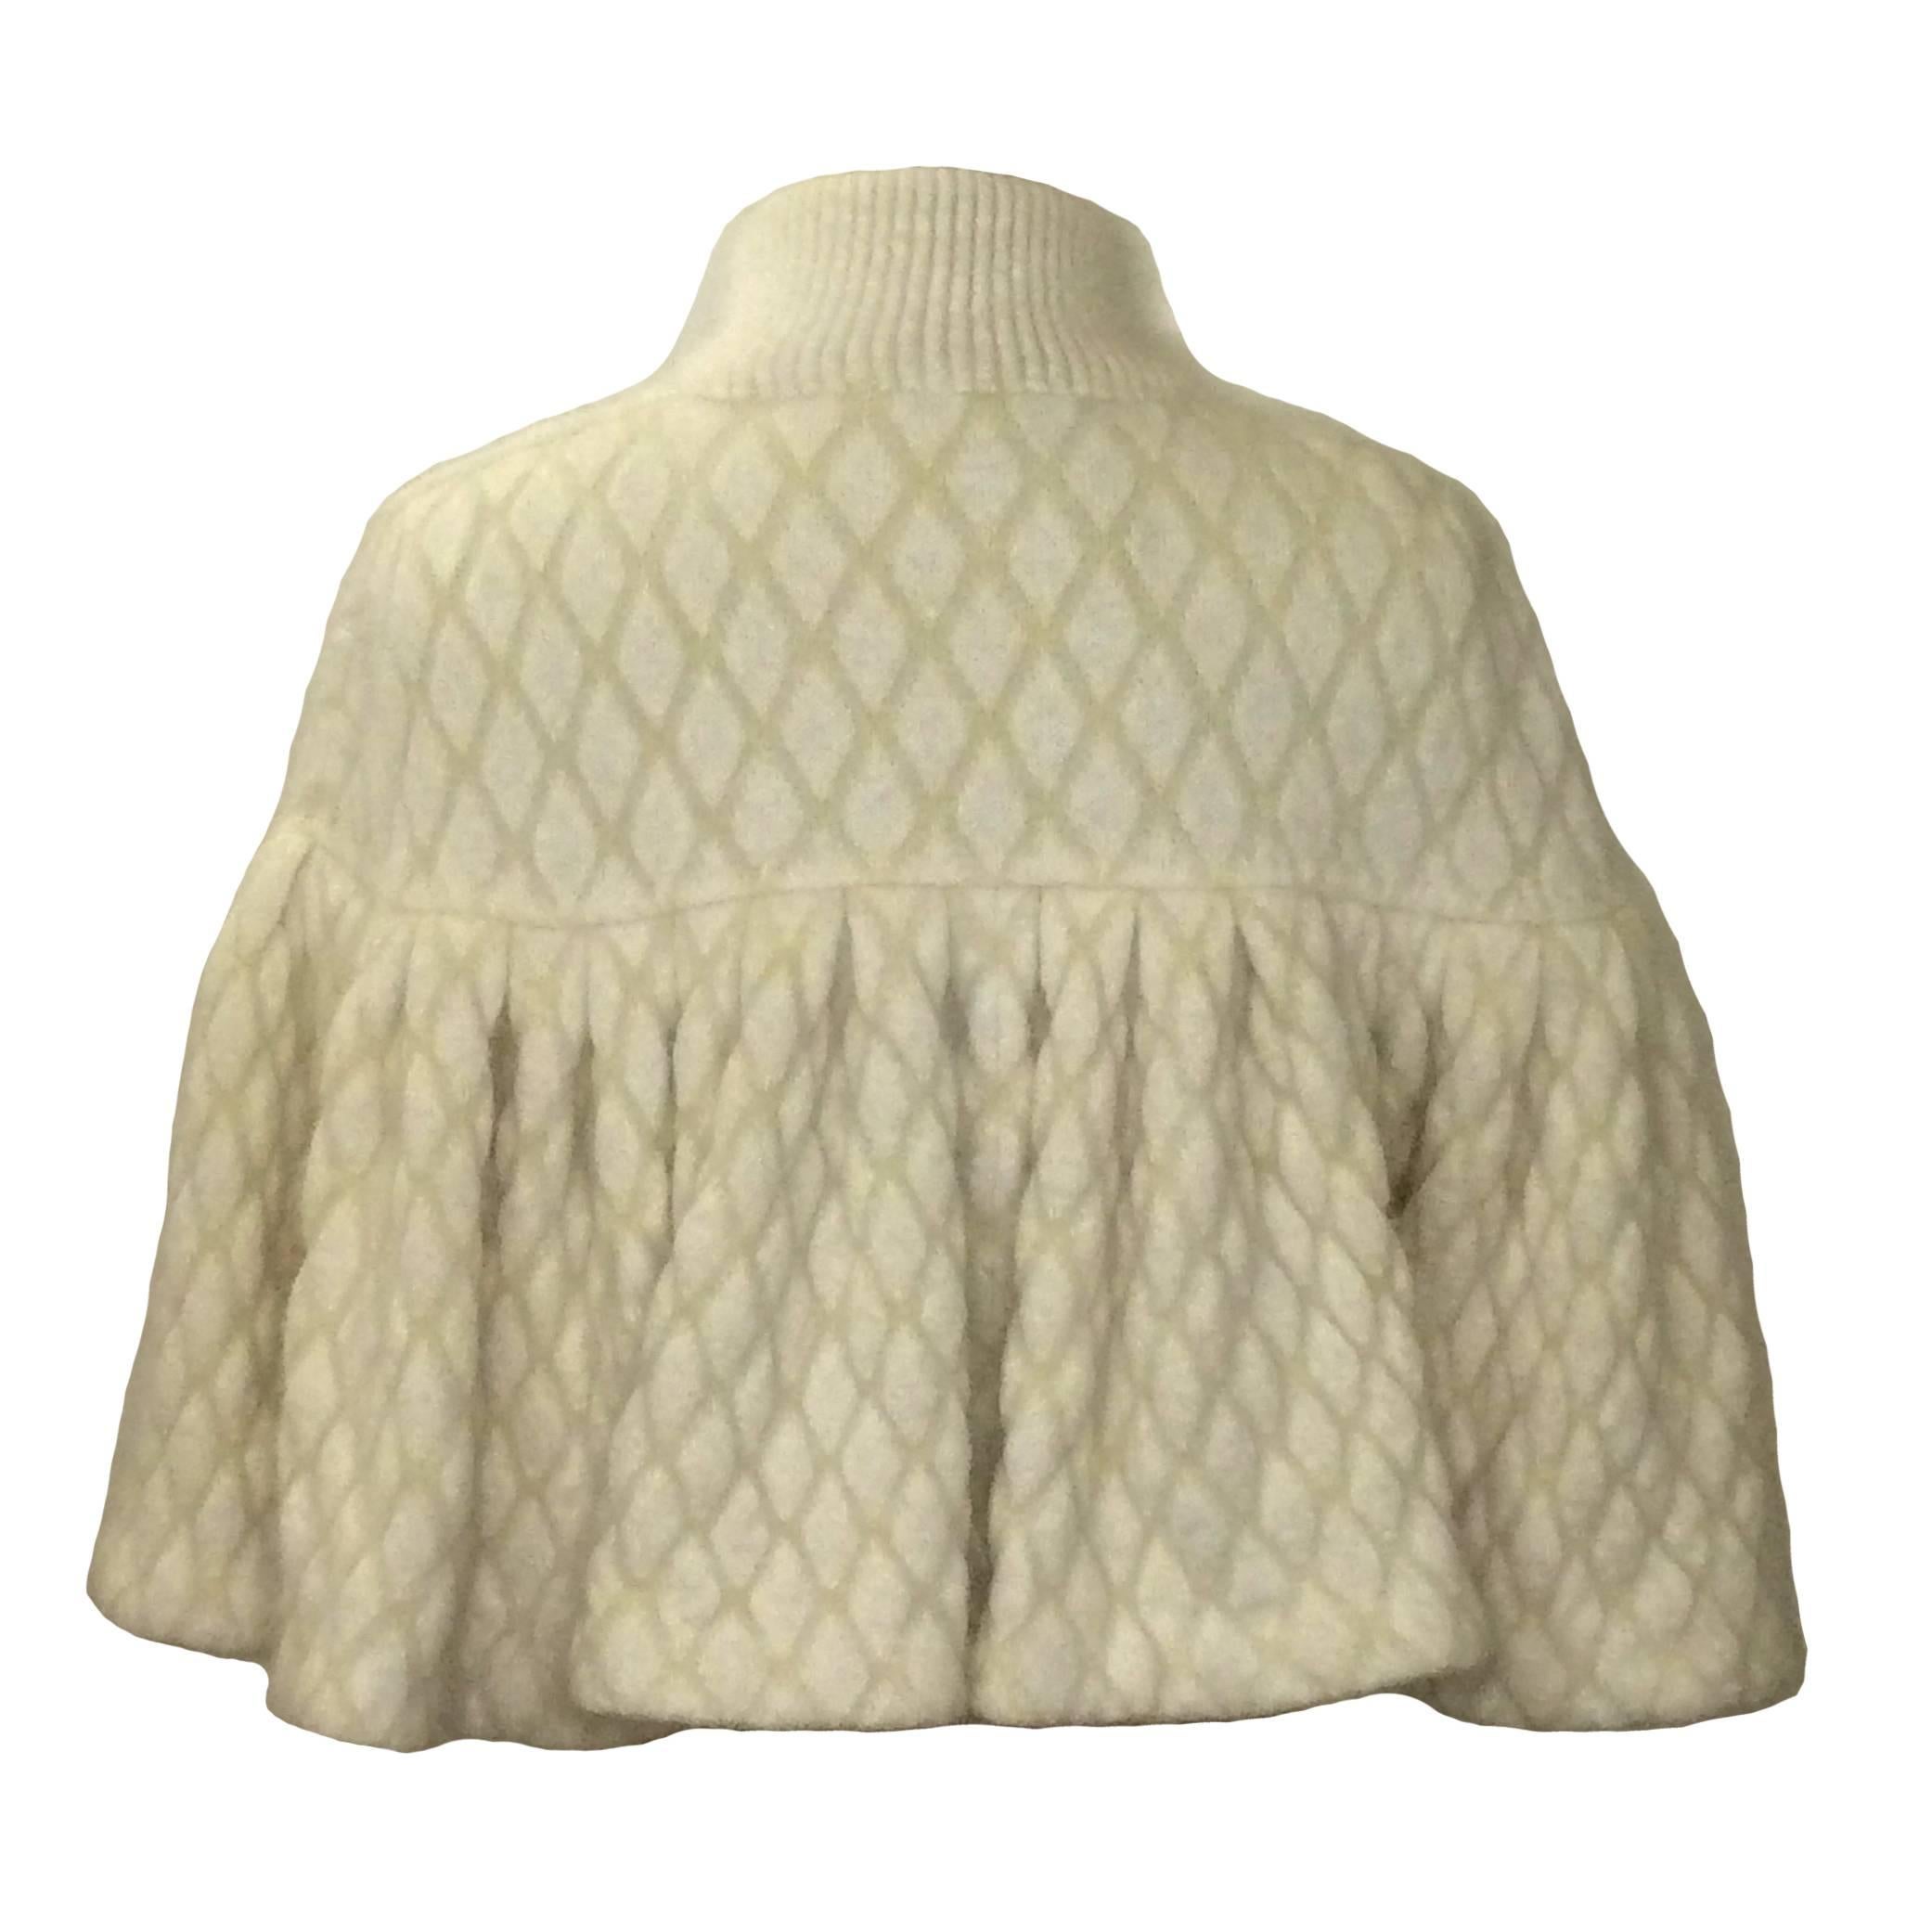 Alexander McQueen Fall/Winter 2013 cream capelet in a diamond-knit jacquard. Super soft & fuzzy blend of 56% angora, 25% polyamide, and 19% viscose.

Fastens closed at front with hidden snaps from neck to bottom.

Size Small. 
Measures approximately